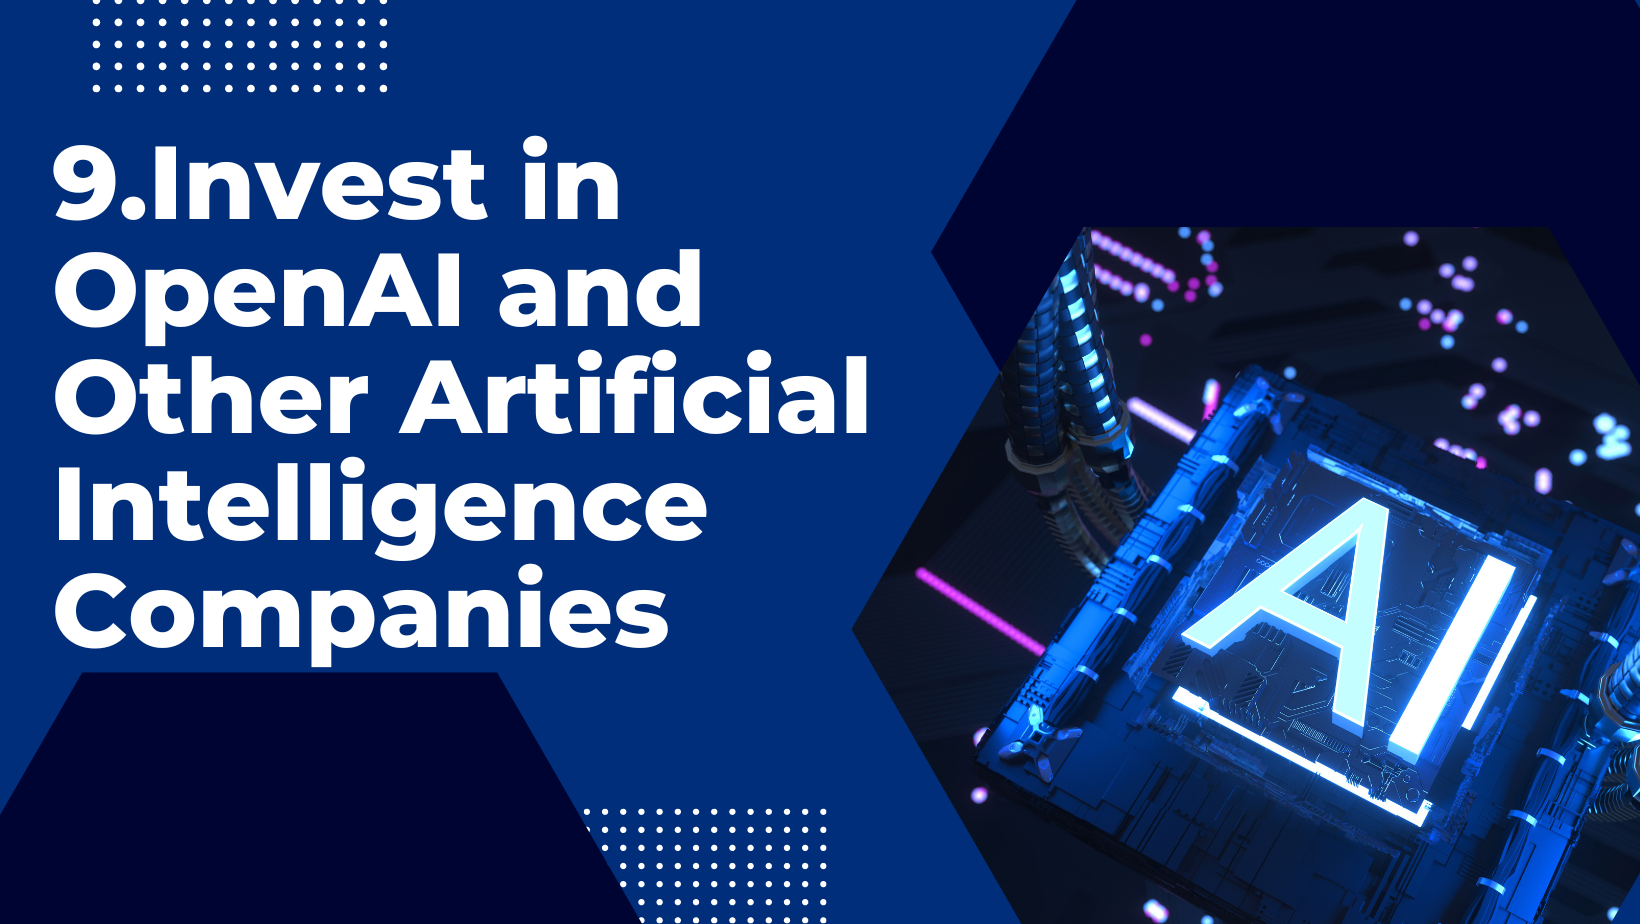 Invest in OpenAI and Other Artificial Intelligence Companies